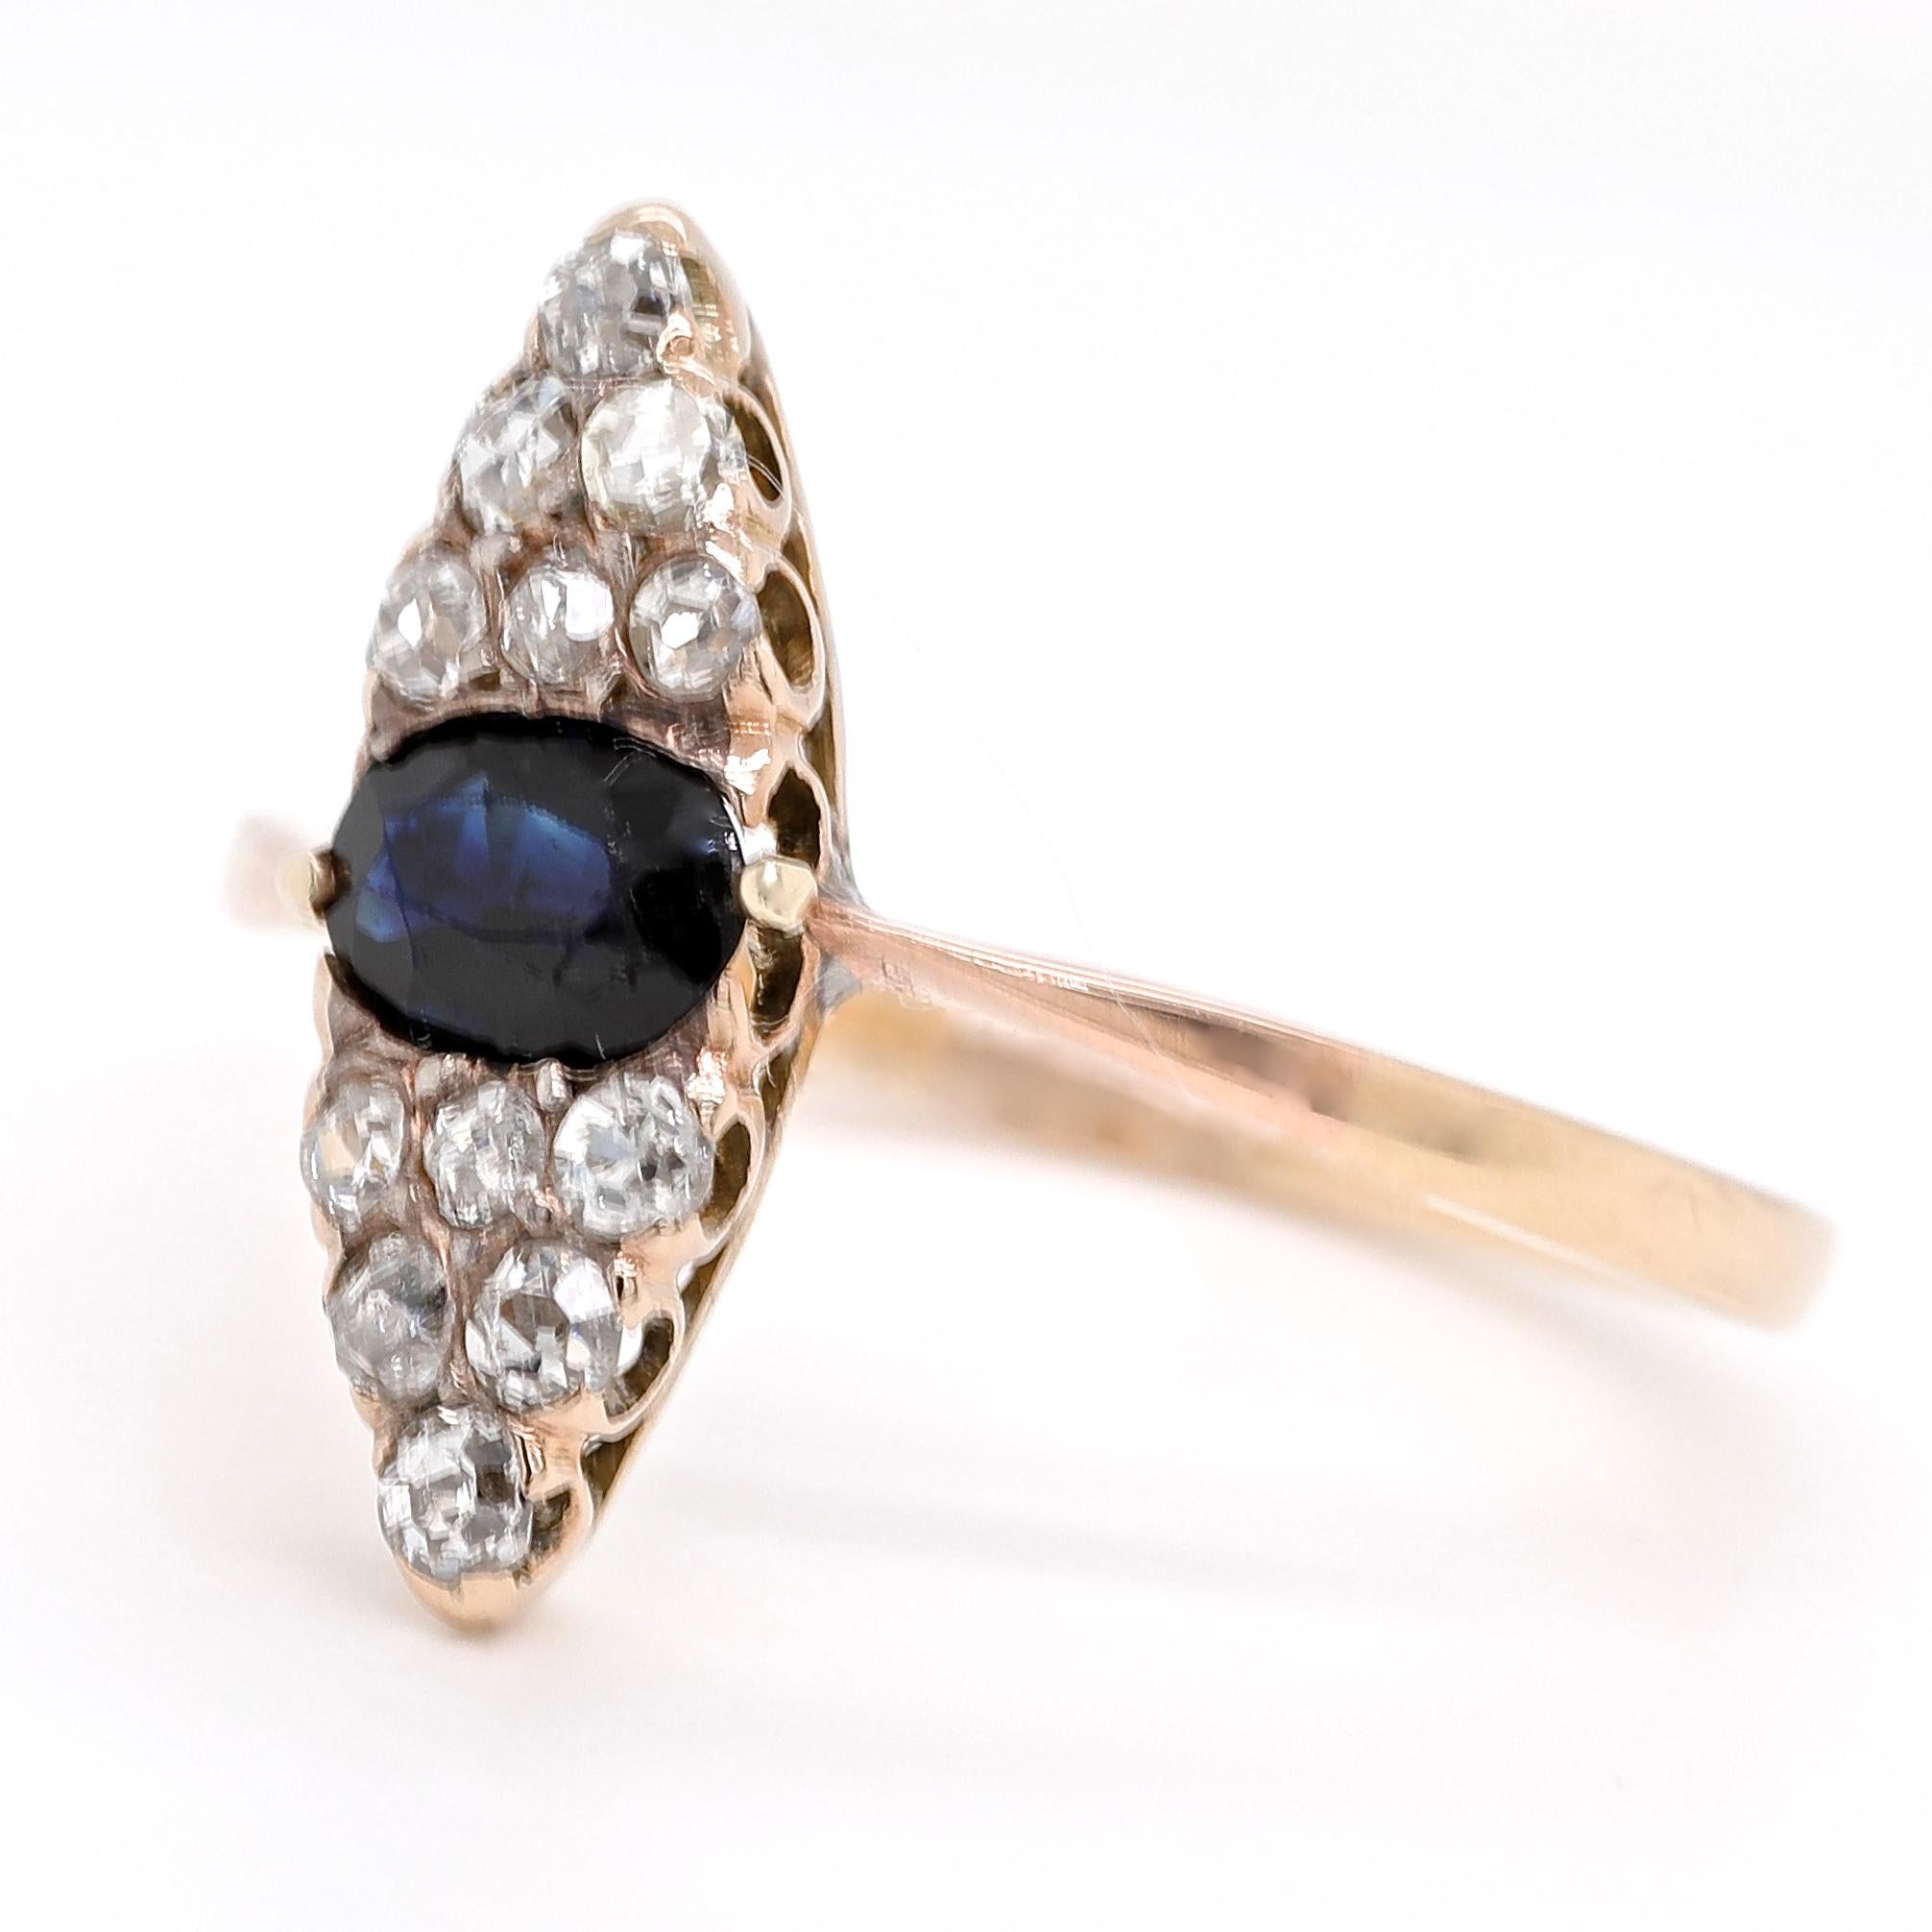 Are you looking for a one of a kind ring with antique history? A ring that will always belong in a palace? Feel yourself like royalty watching The Crown while wearing this beauty. The ring is an Edwardian Sapphire Diamond 14k Gold Cluster Navette